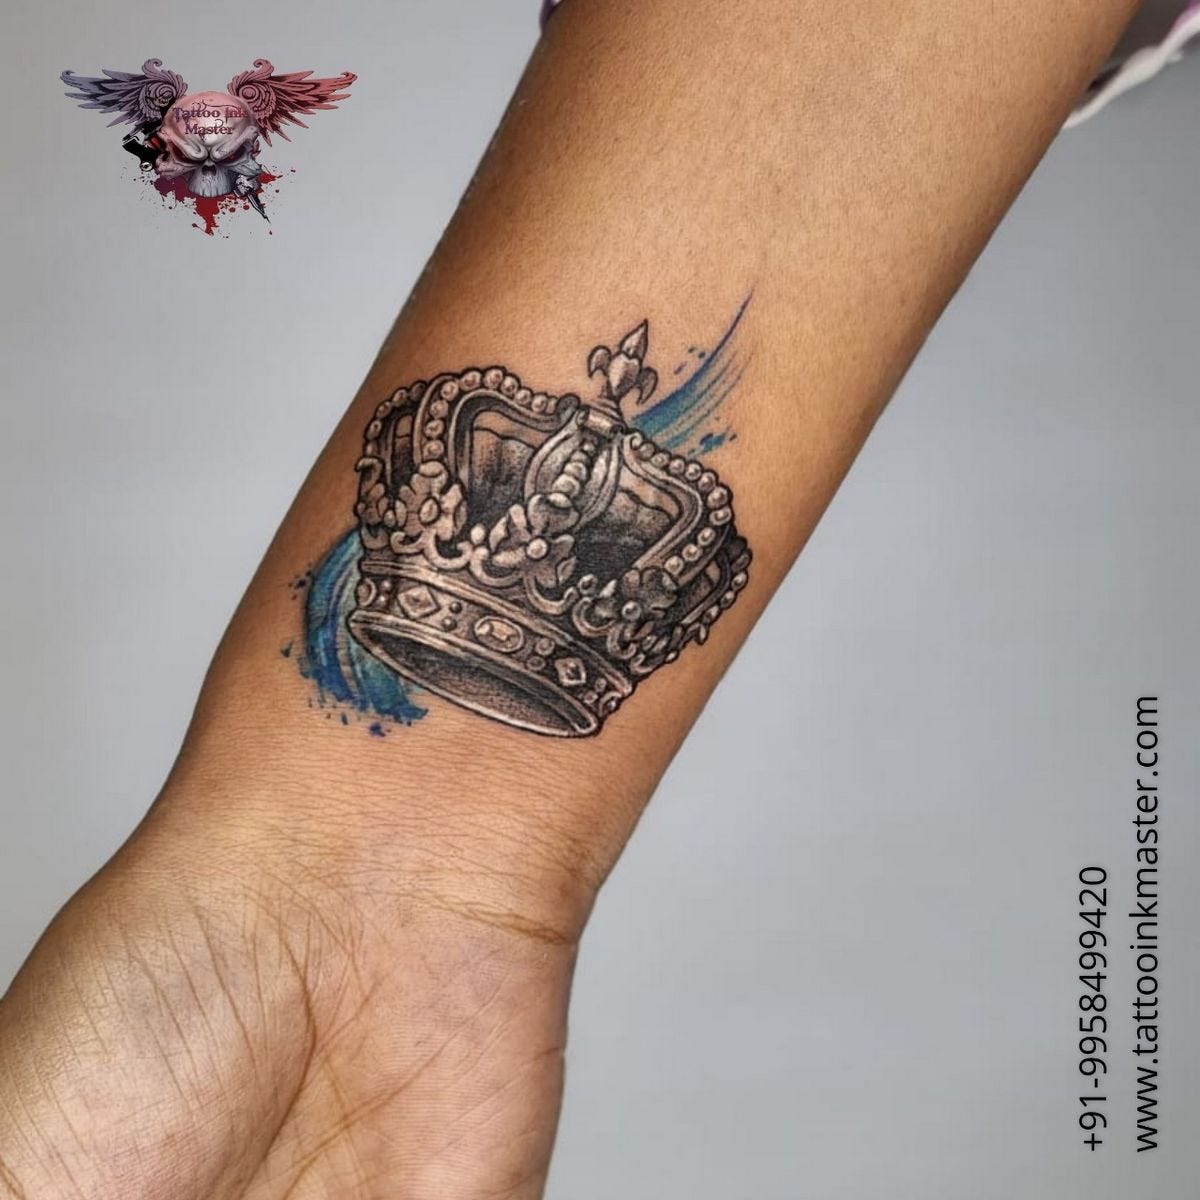 Simply Inked New King And Queen Temporary Tattoos